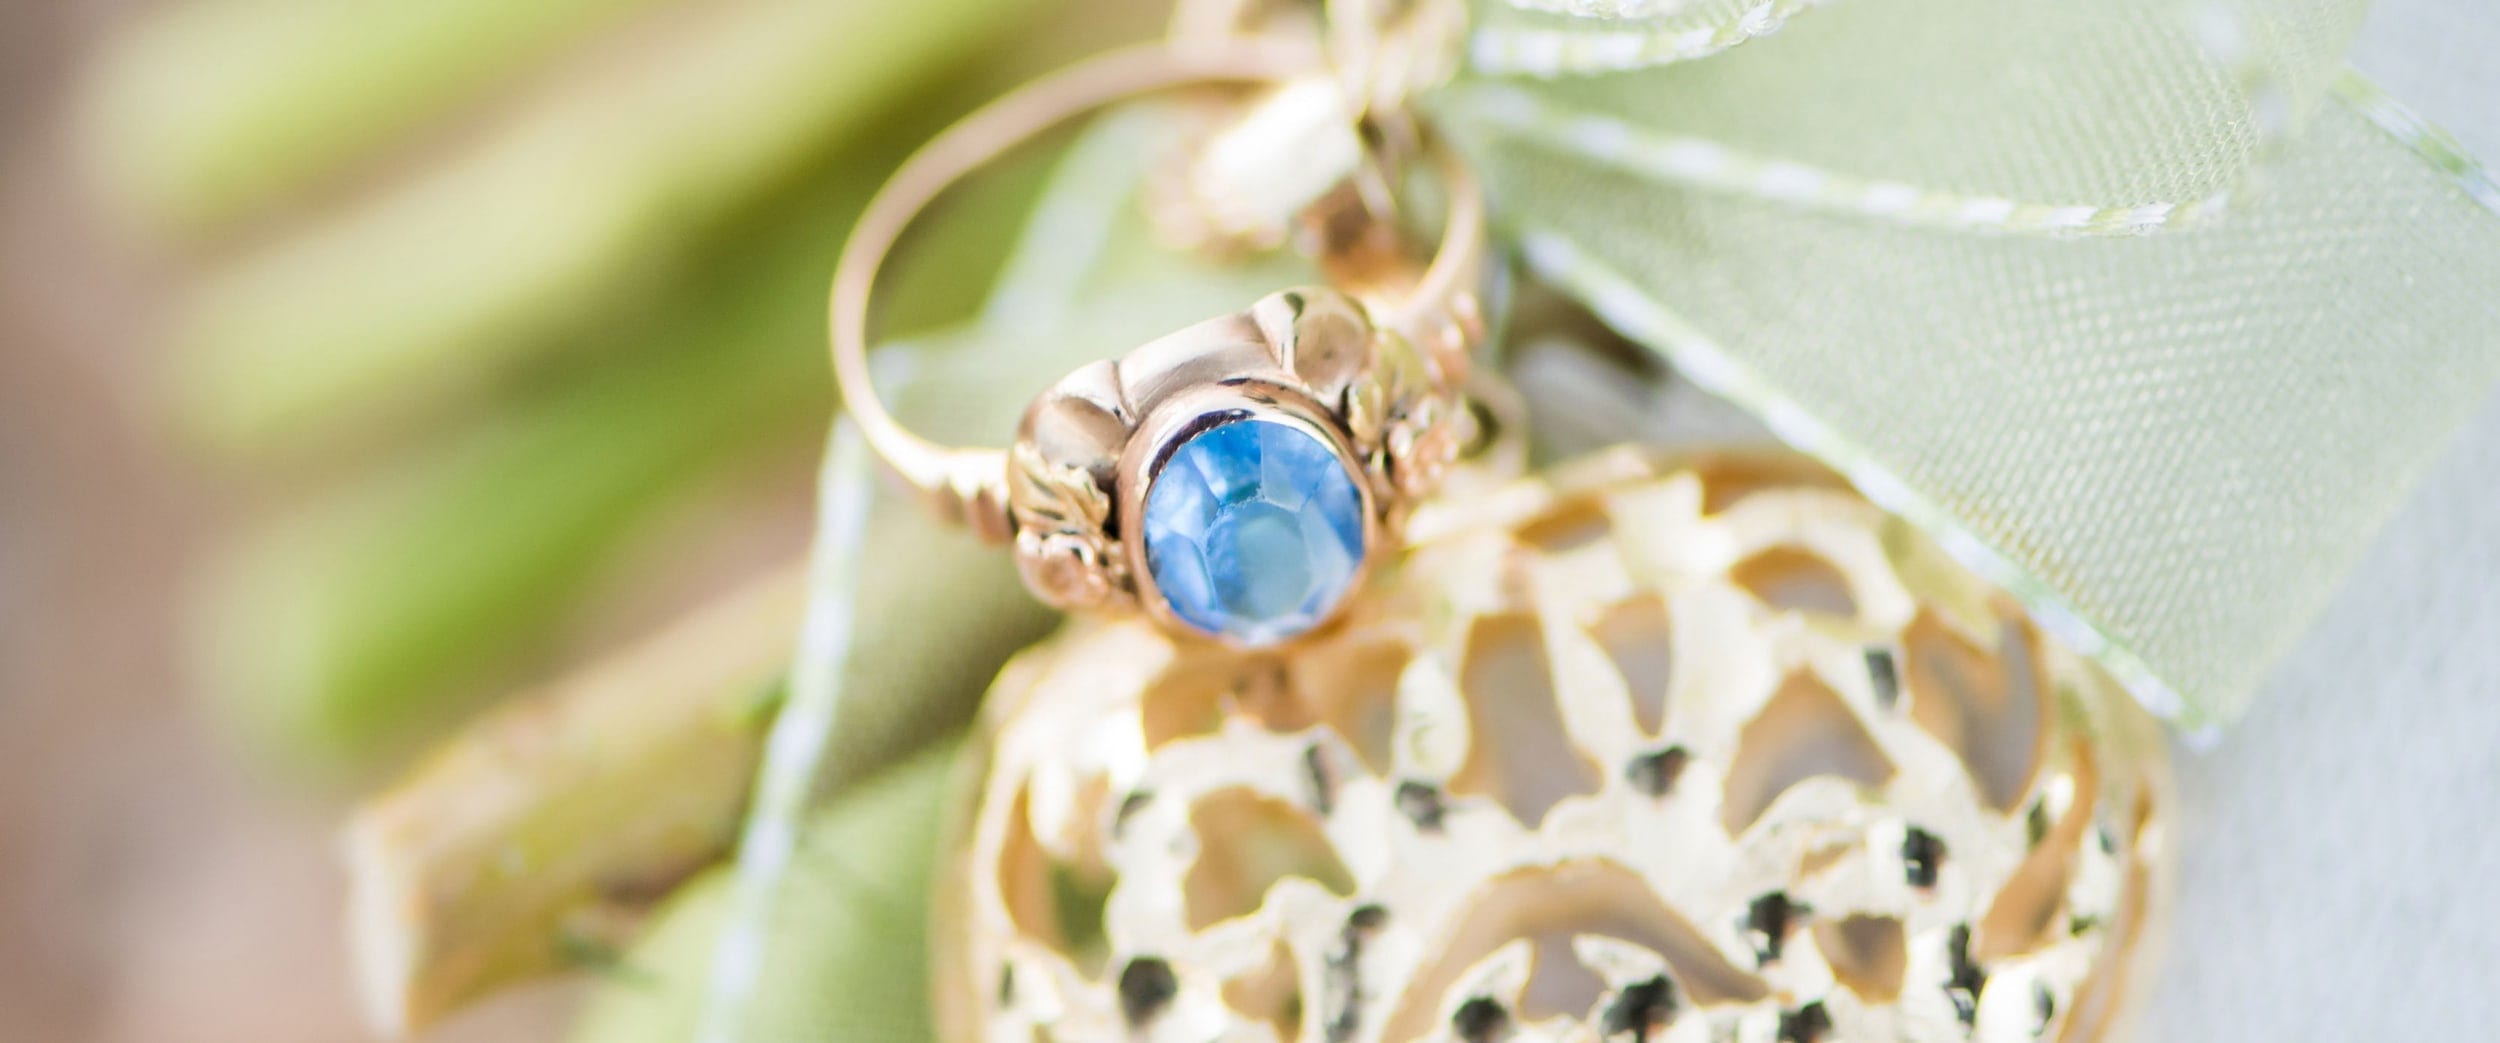 A photo of a blue gem in a gold ring setting.